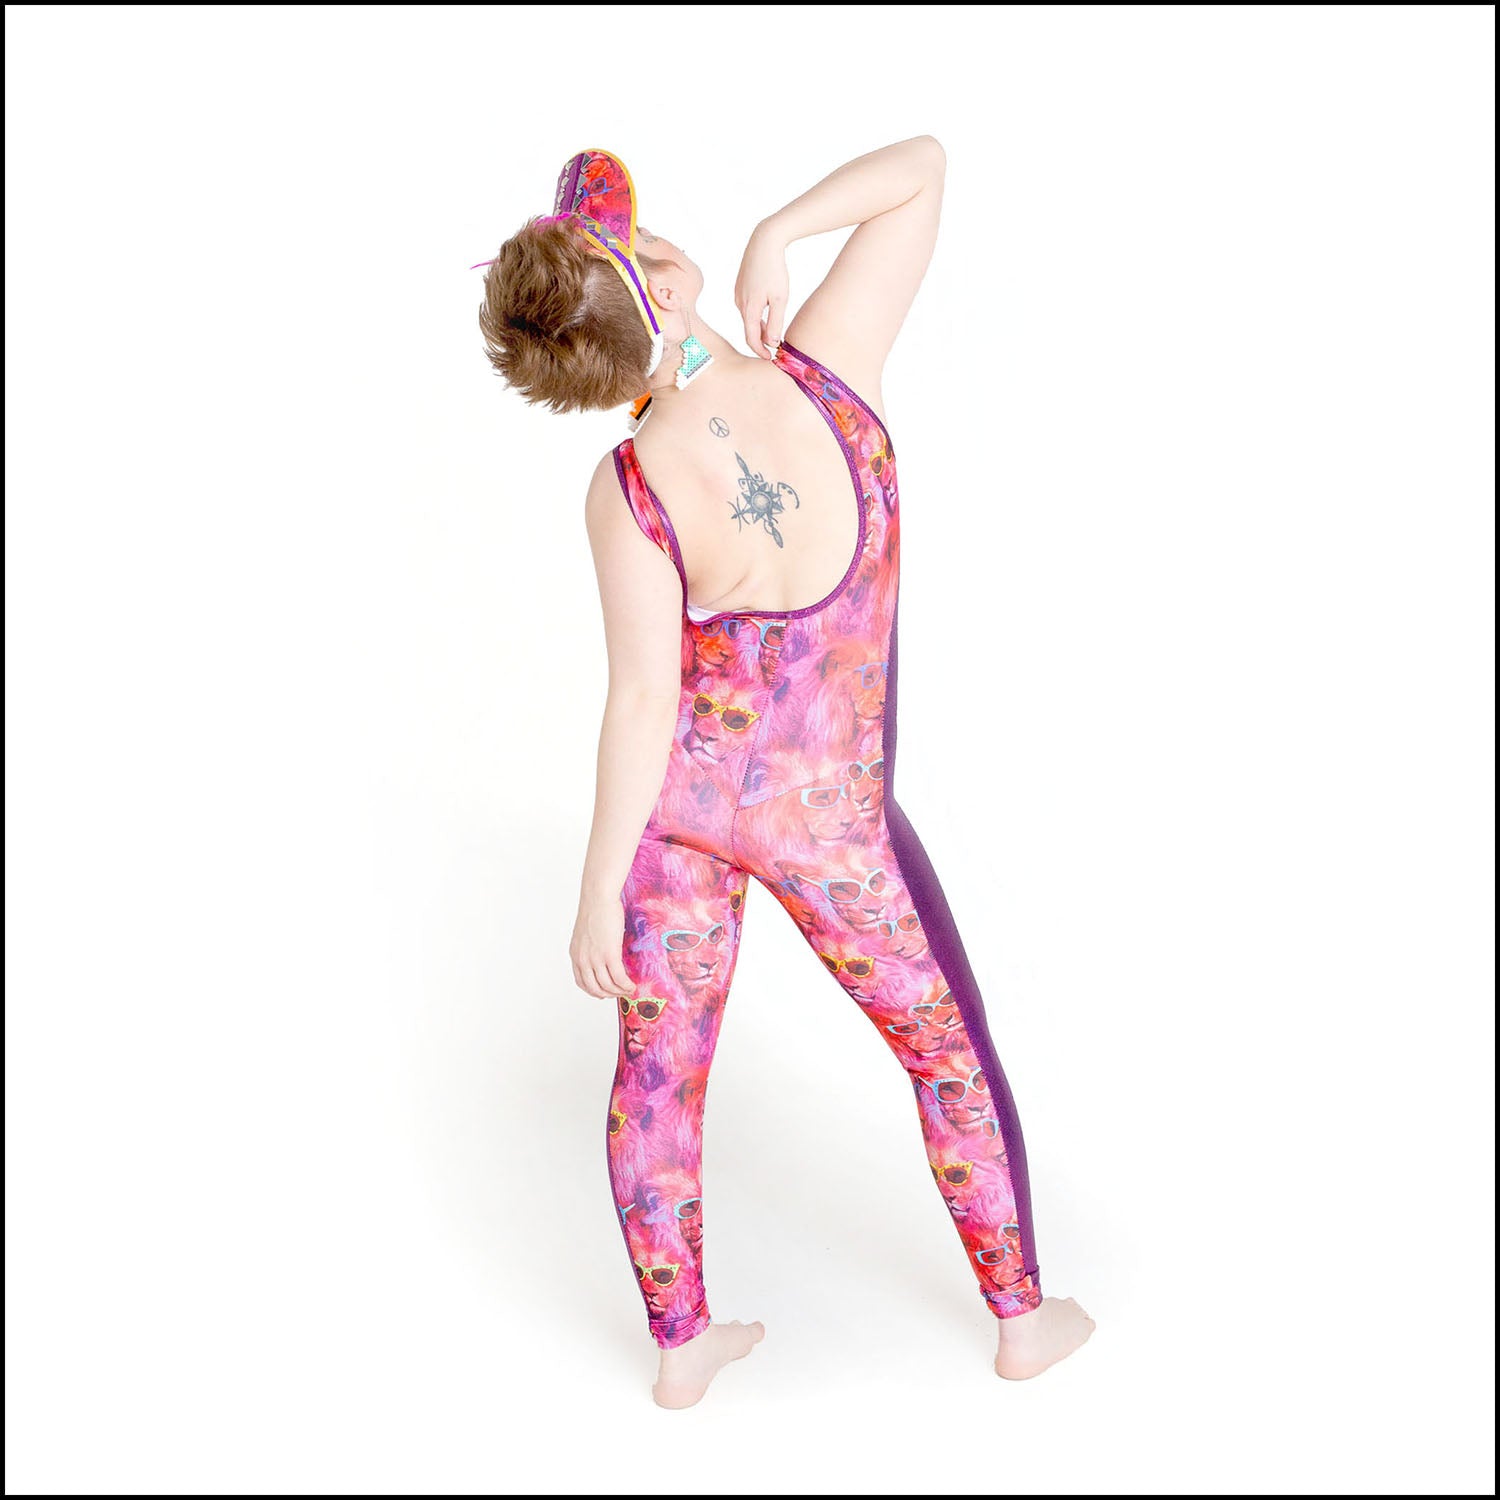 Cool Catsuit, a handmade-to-order piece in lion fest printed spandex. This statement catsuit is both stylish and sustainable. The unisex design features a flattering V-neck with a purple mesh insert and pink hologram foil full length side panels.